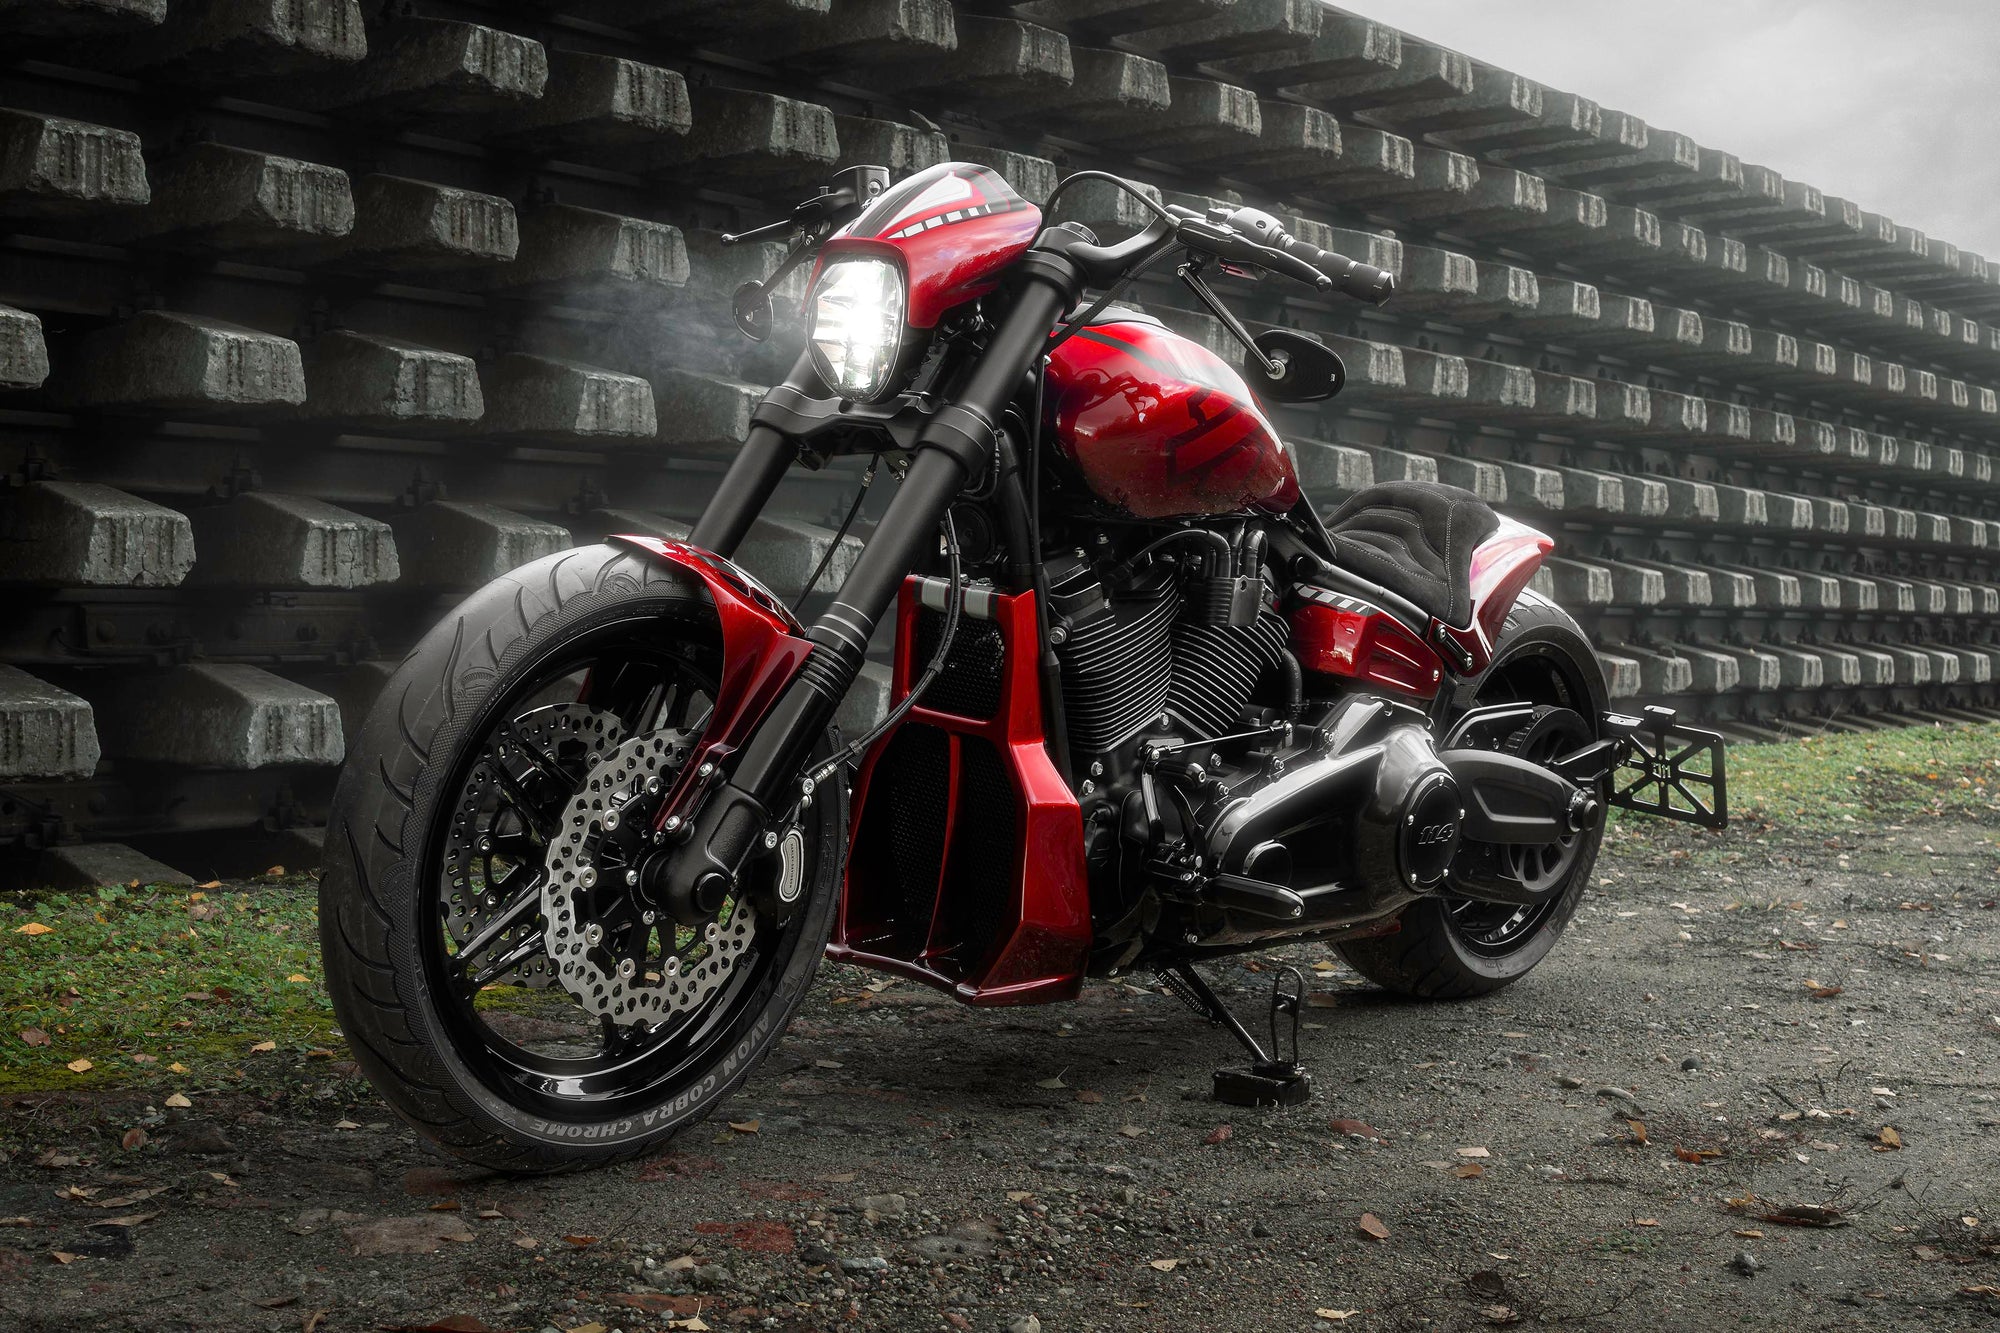 Modified Harley Davidson Softail motorcycle with Killer Custom parts from the side outside on a gloomy day in an industrial environment